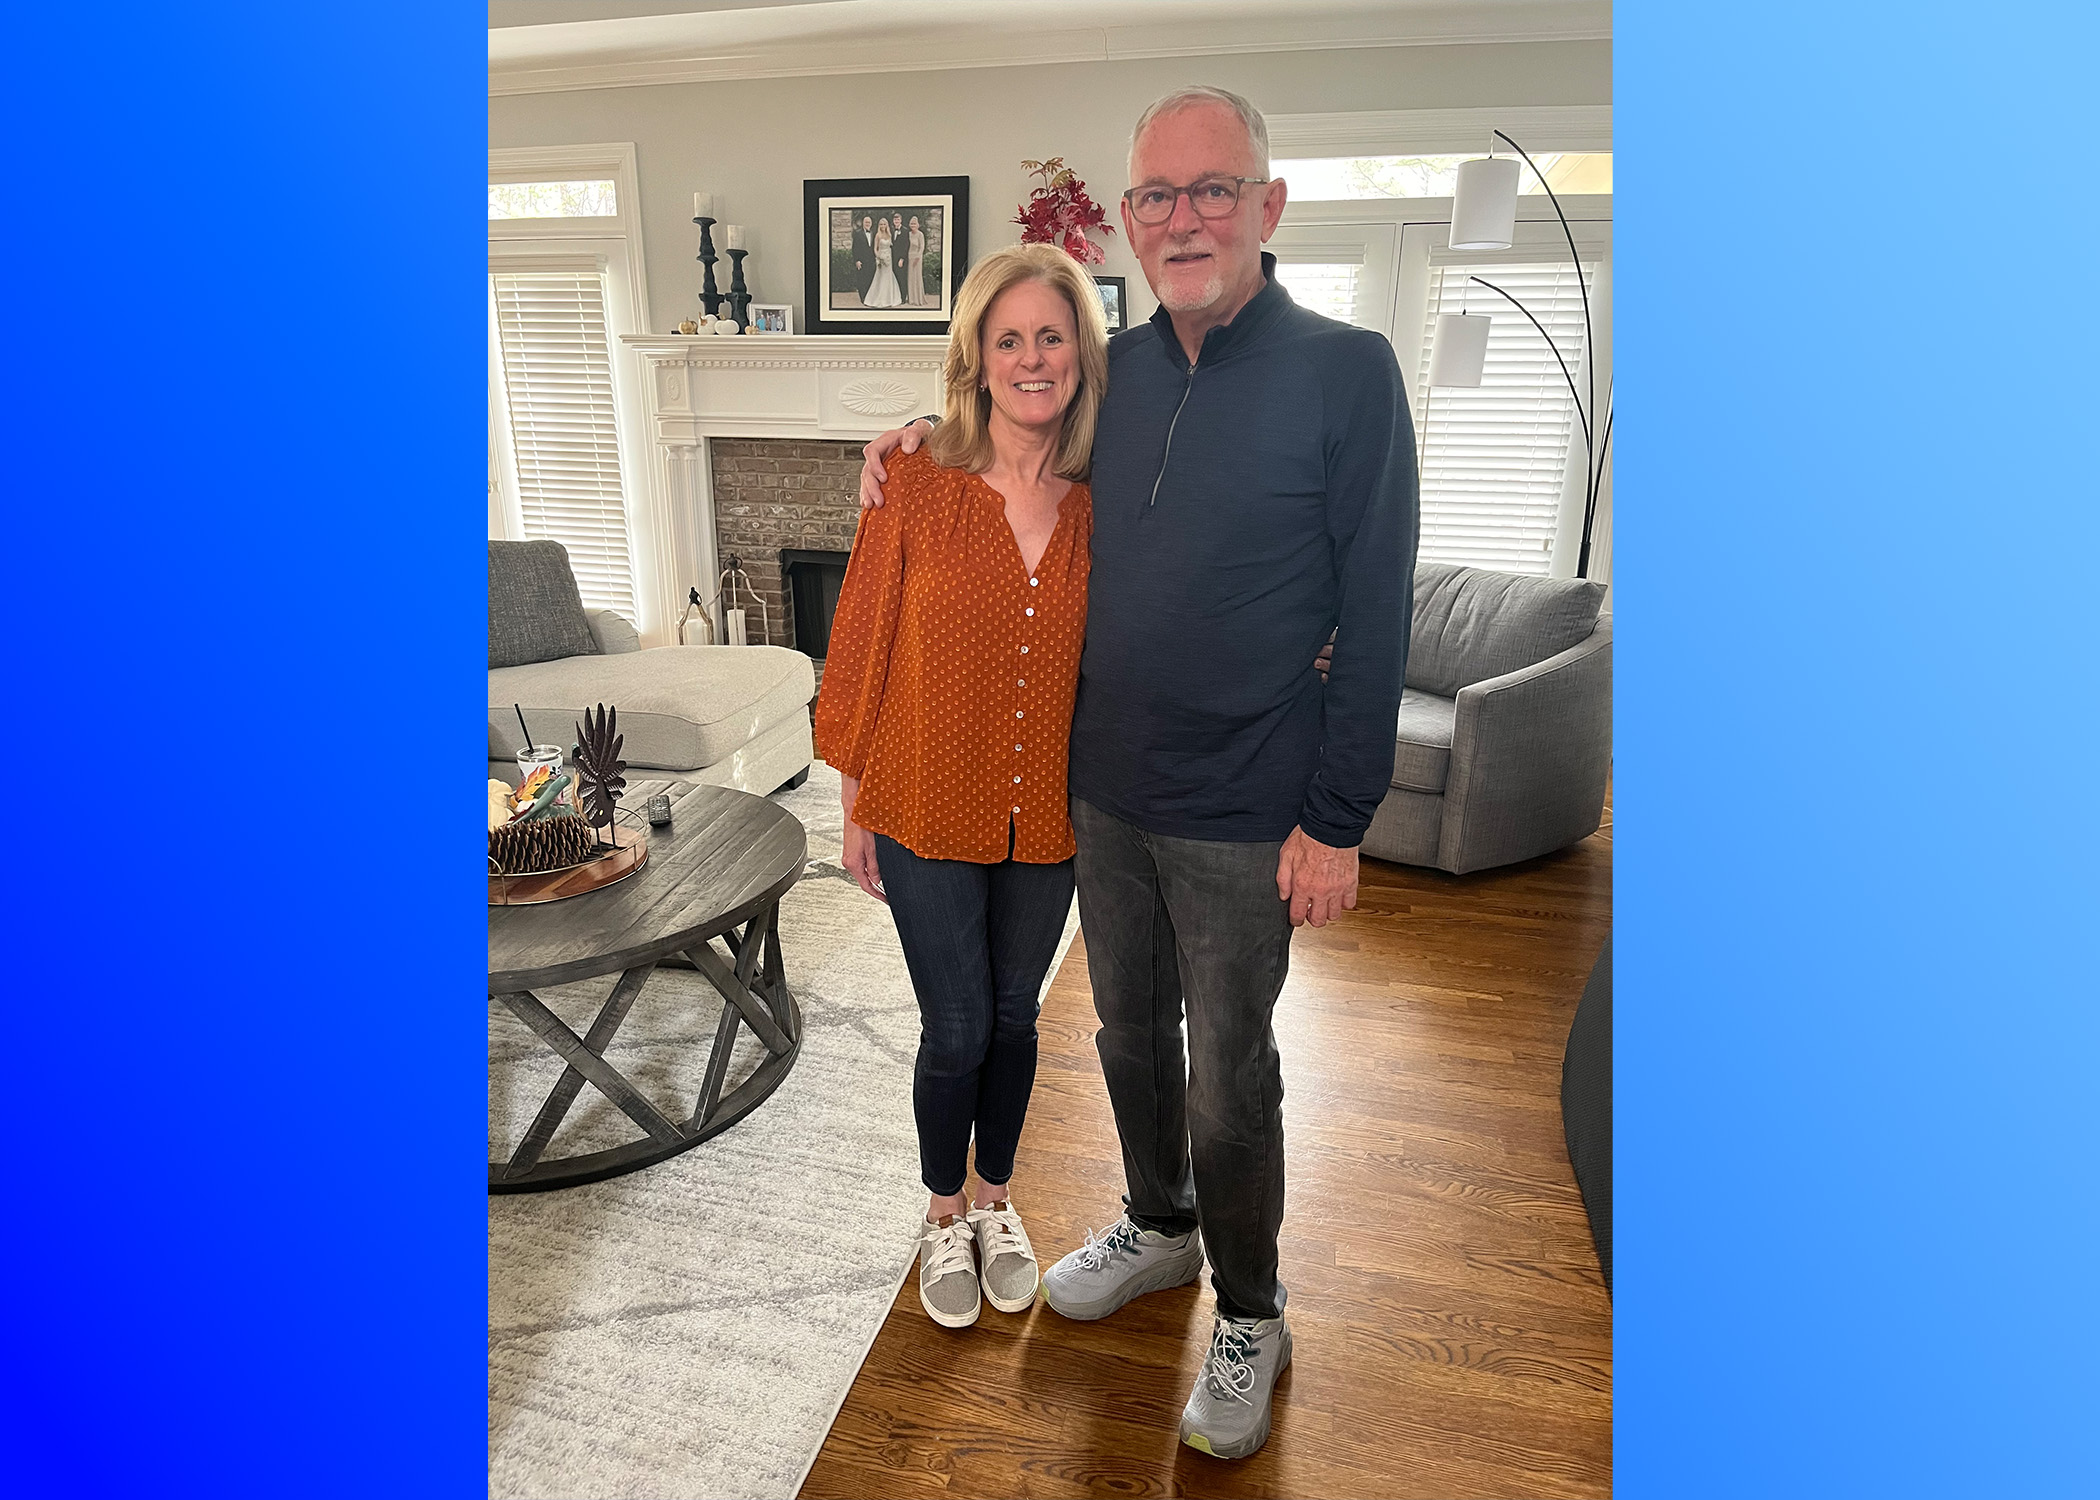 Pinson Mayor spreads awareness about ALS after diagnosis, 'I'm just thankful for all the support'